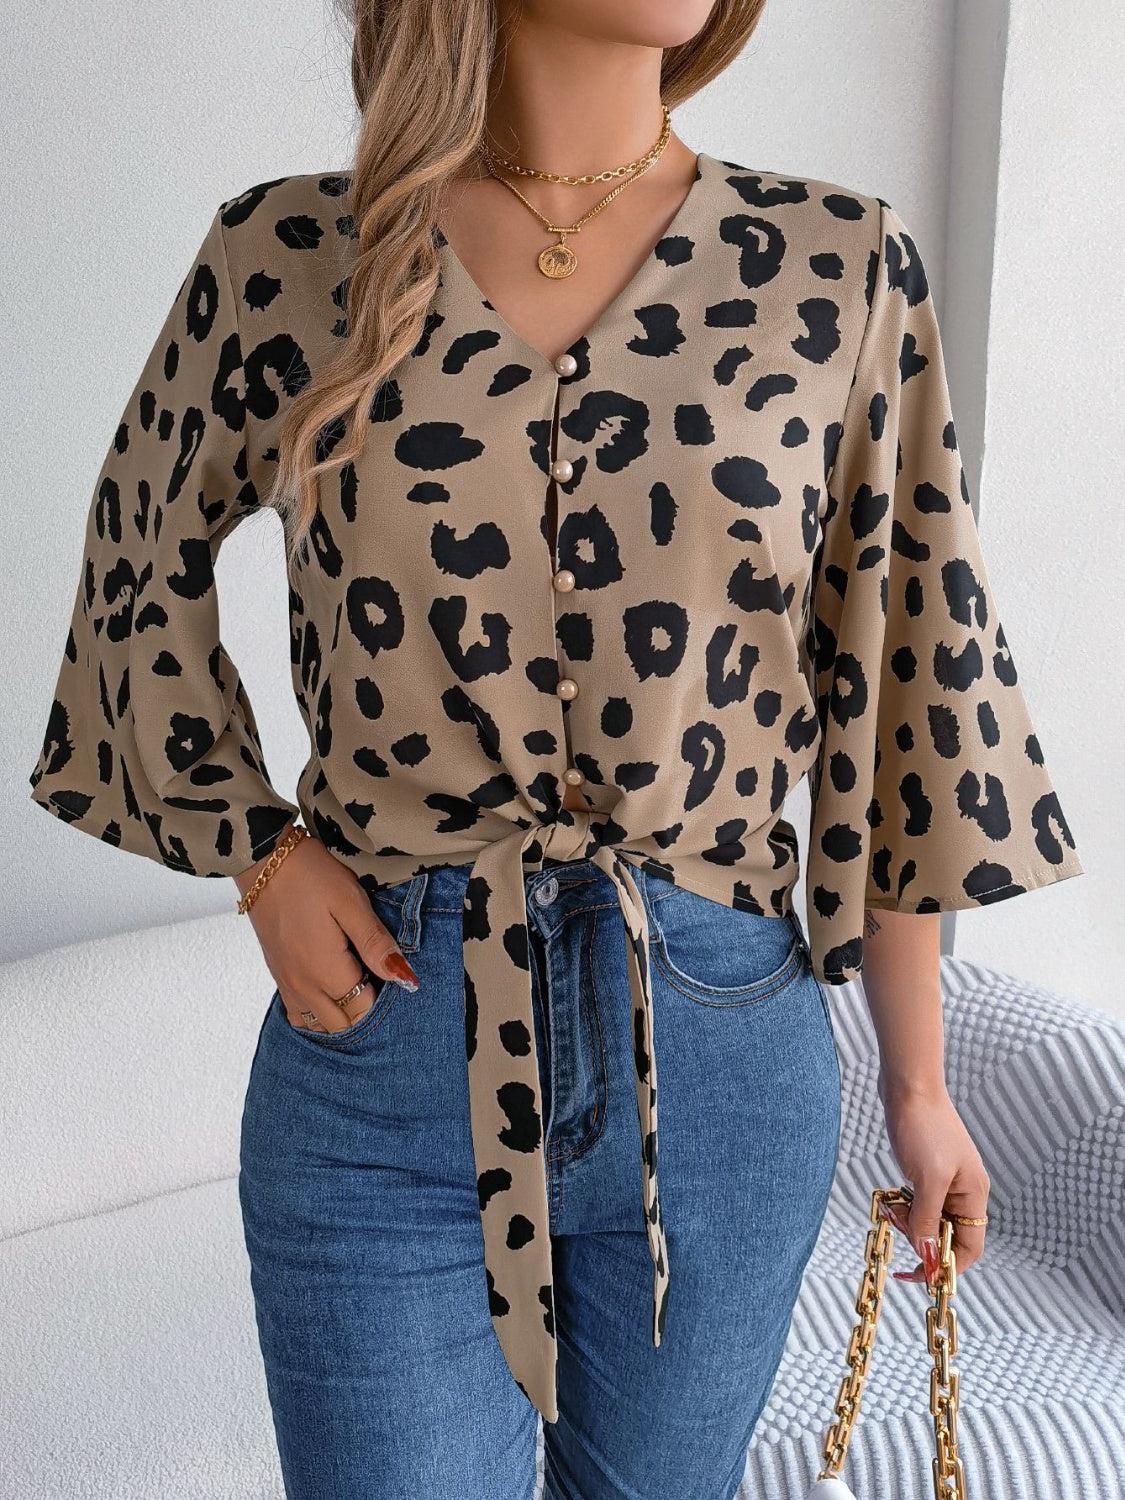 a woman wearing a leopard print shirt and jeans